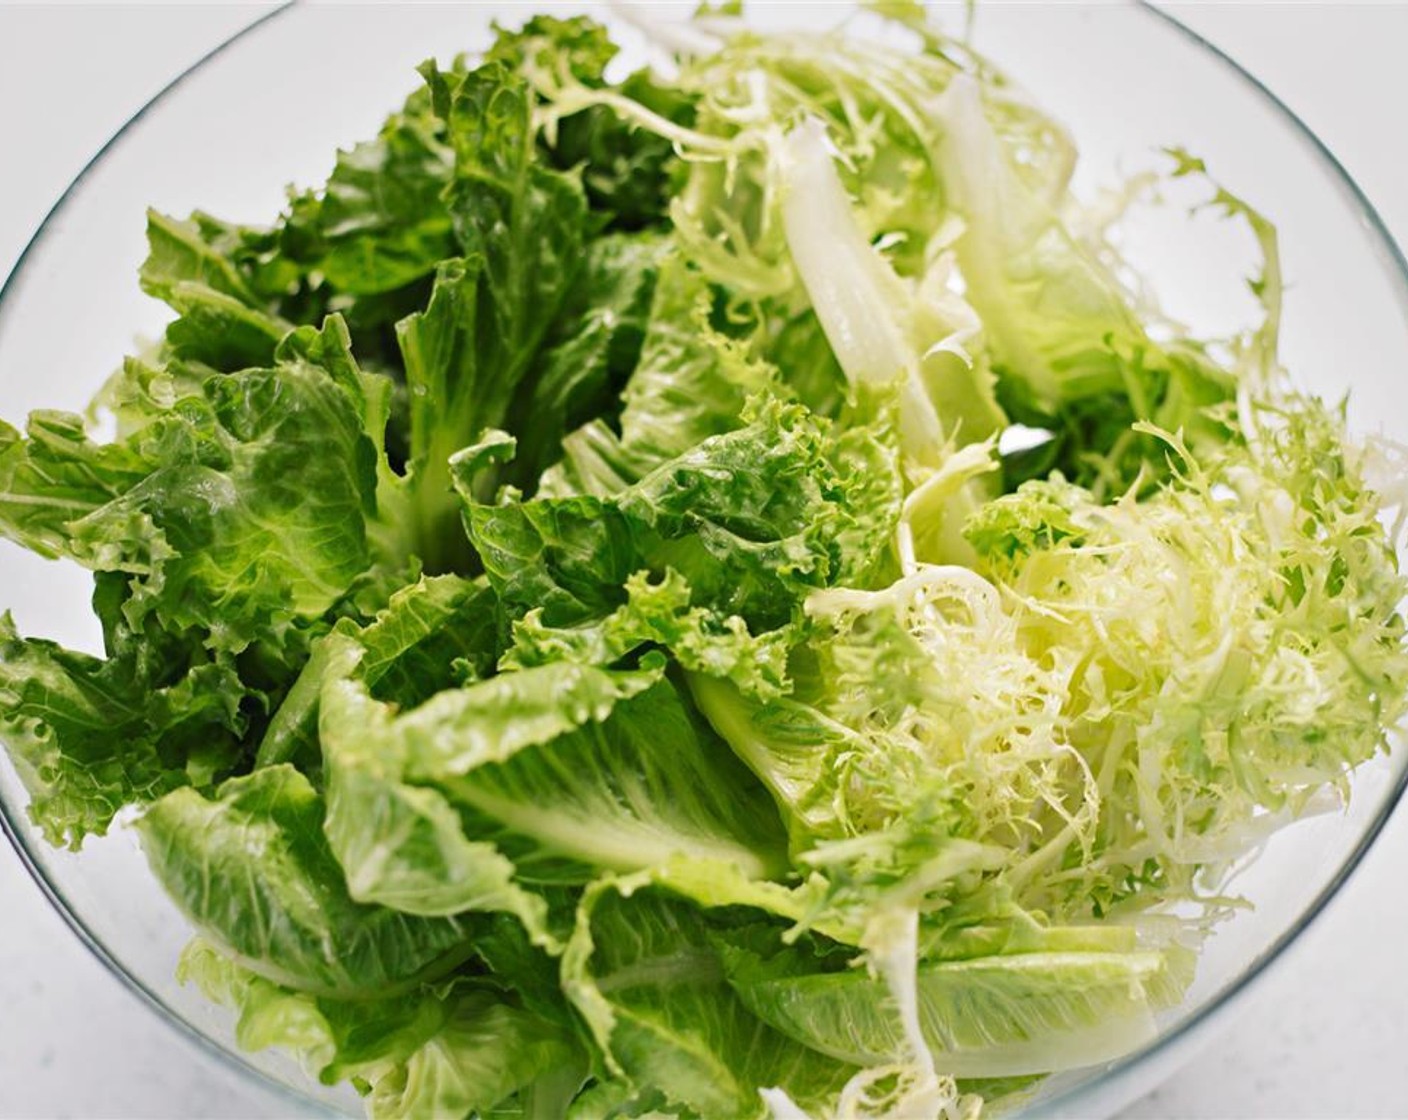 step 2 Tear the Curly Endive (1 bunch), Butter Lettuce (1 bunch), Romaine Lettuce (1 bunch), and Lettuce (1 bunch) into pieces and put in bowl.